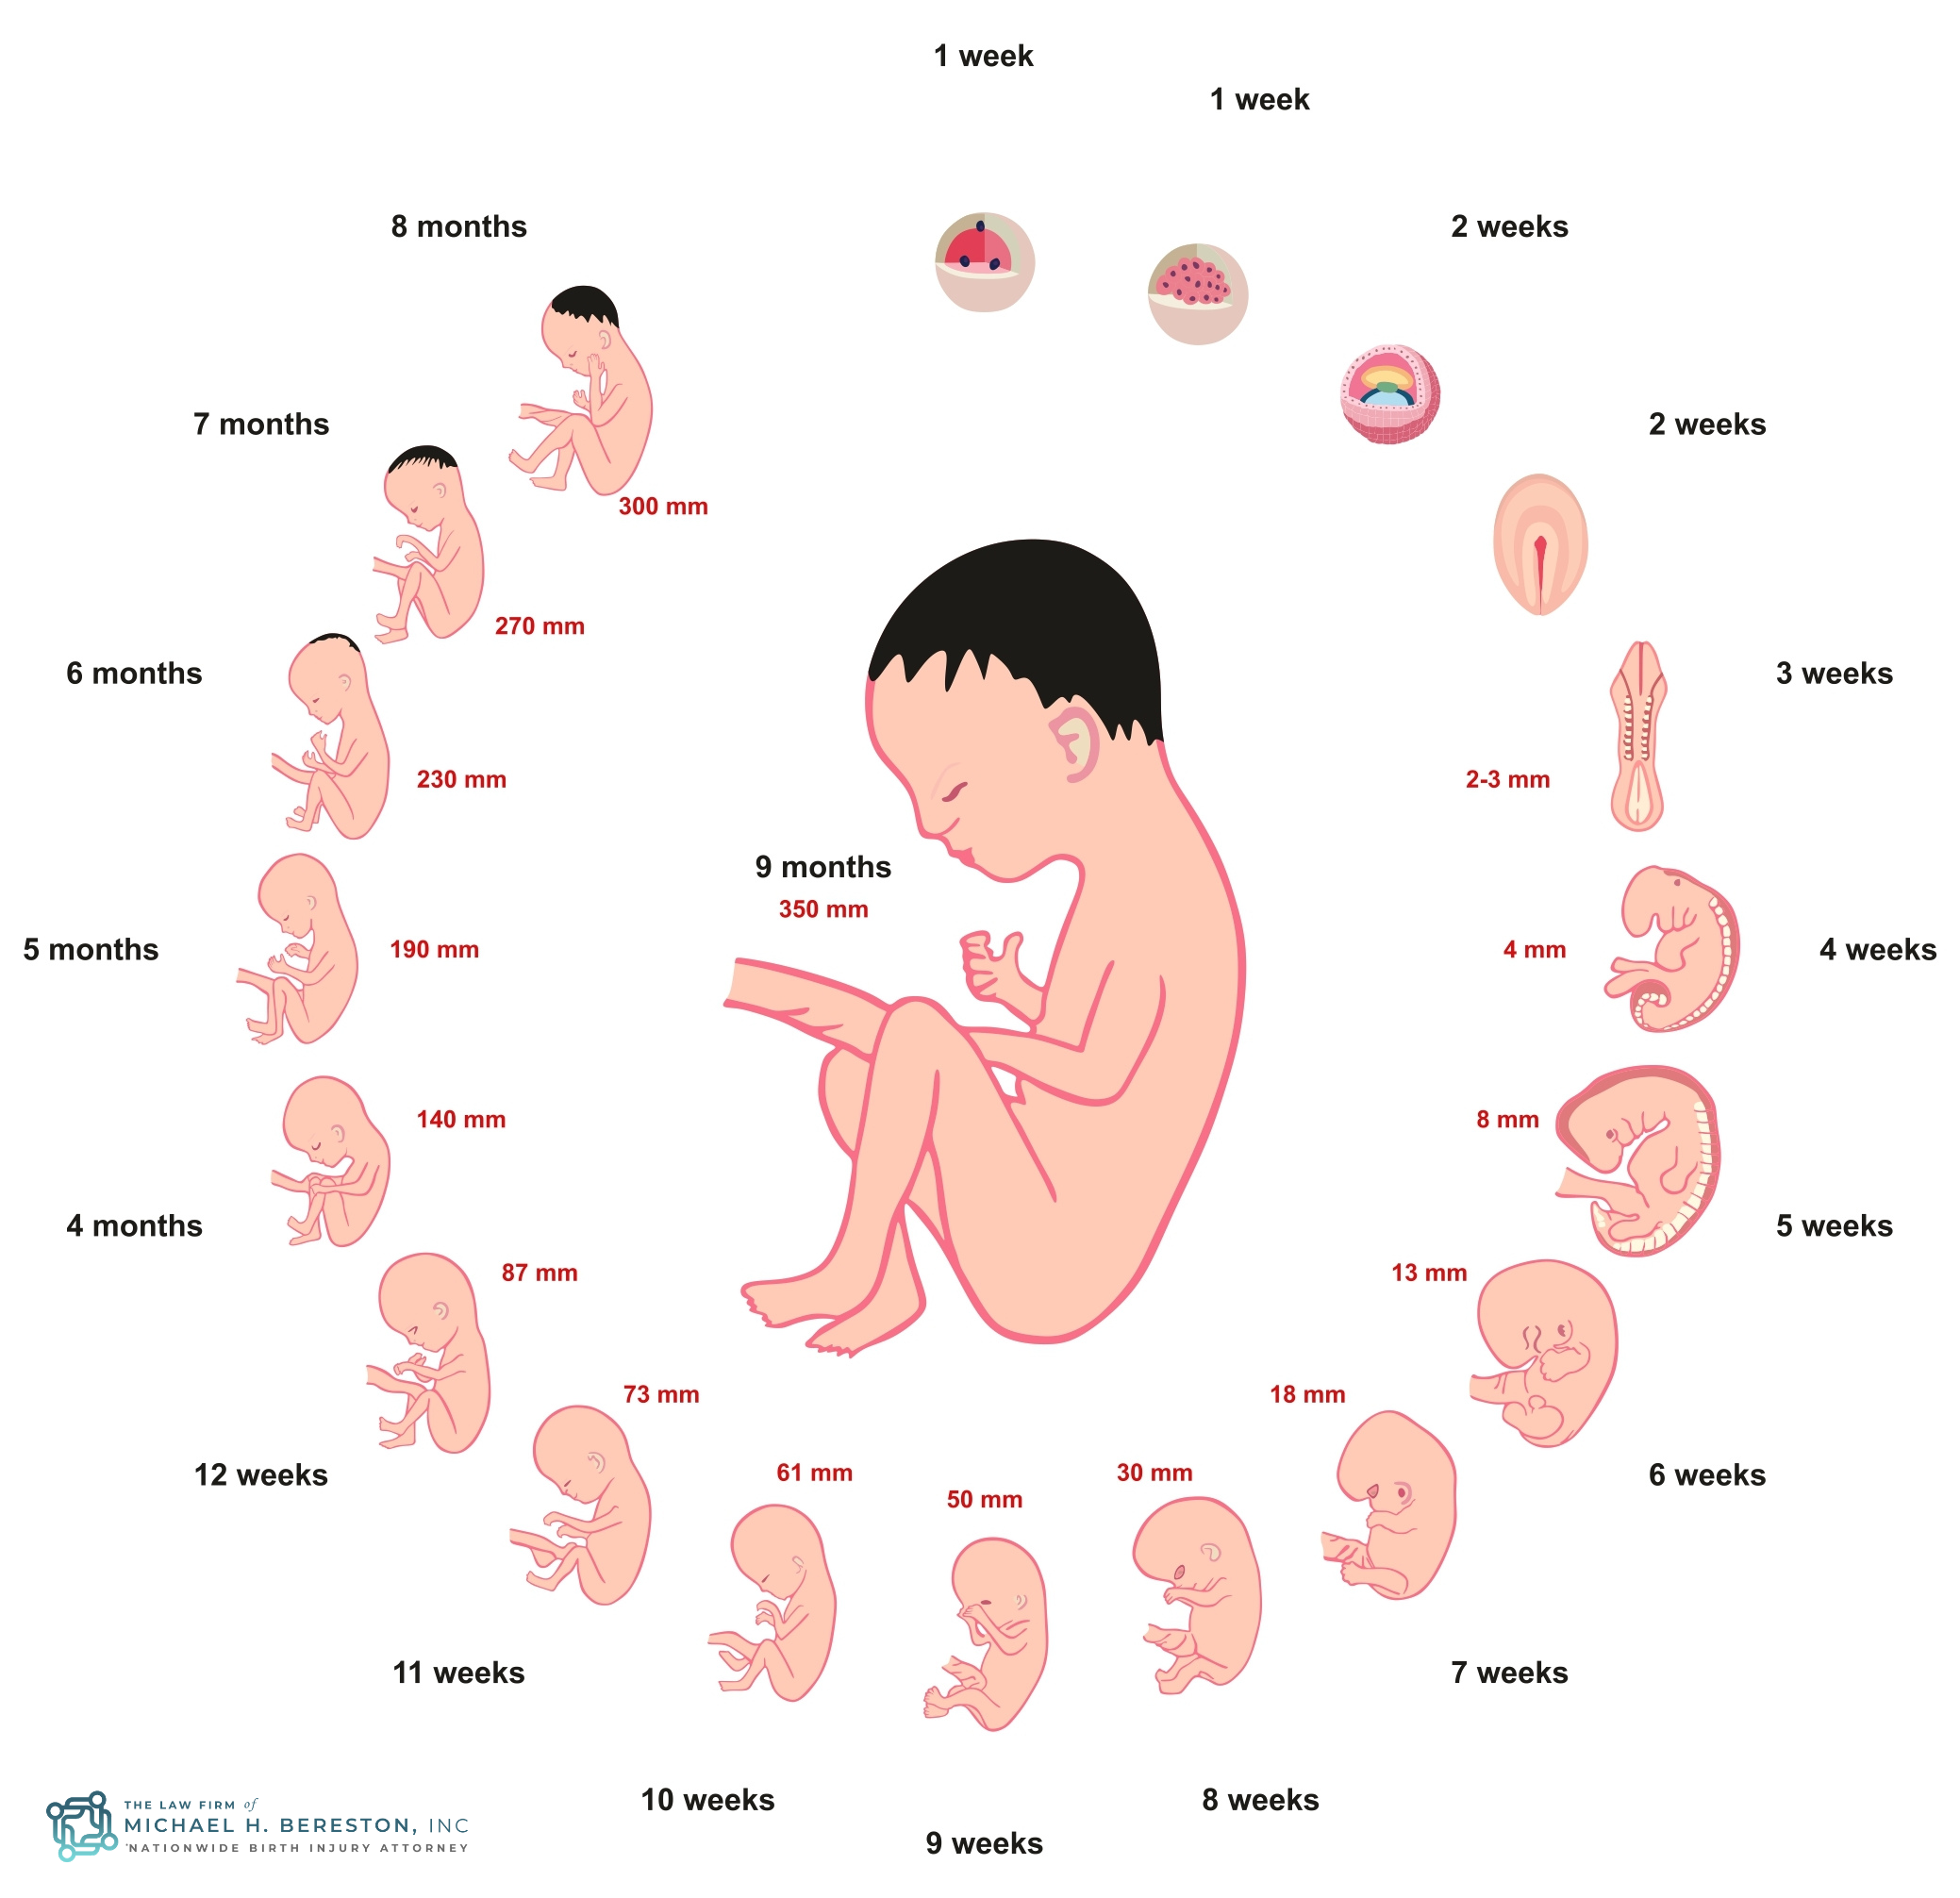 Fetus development formation stages.